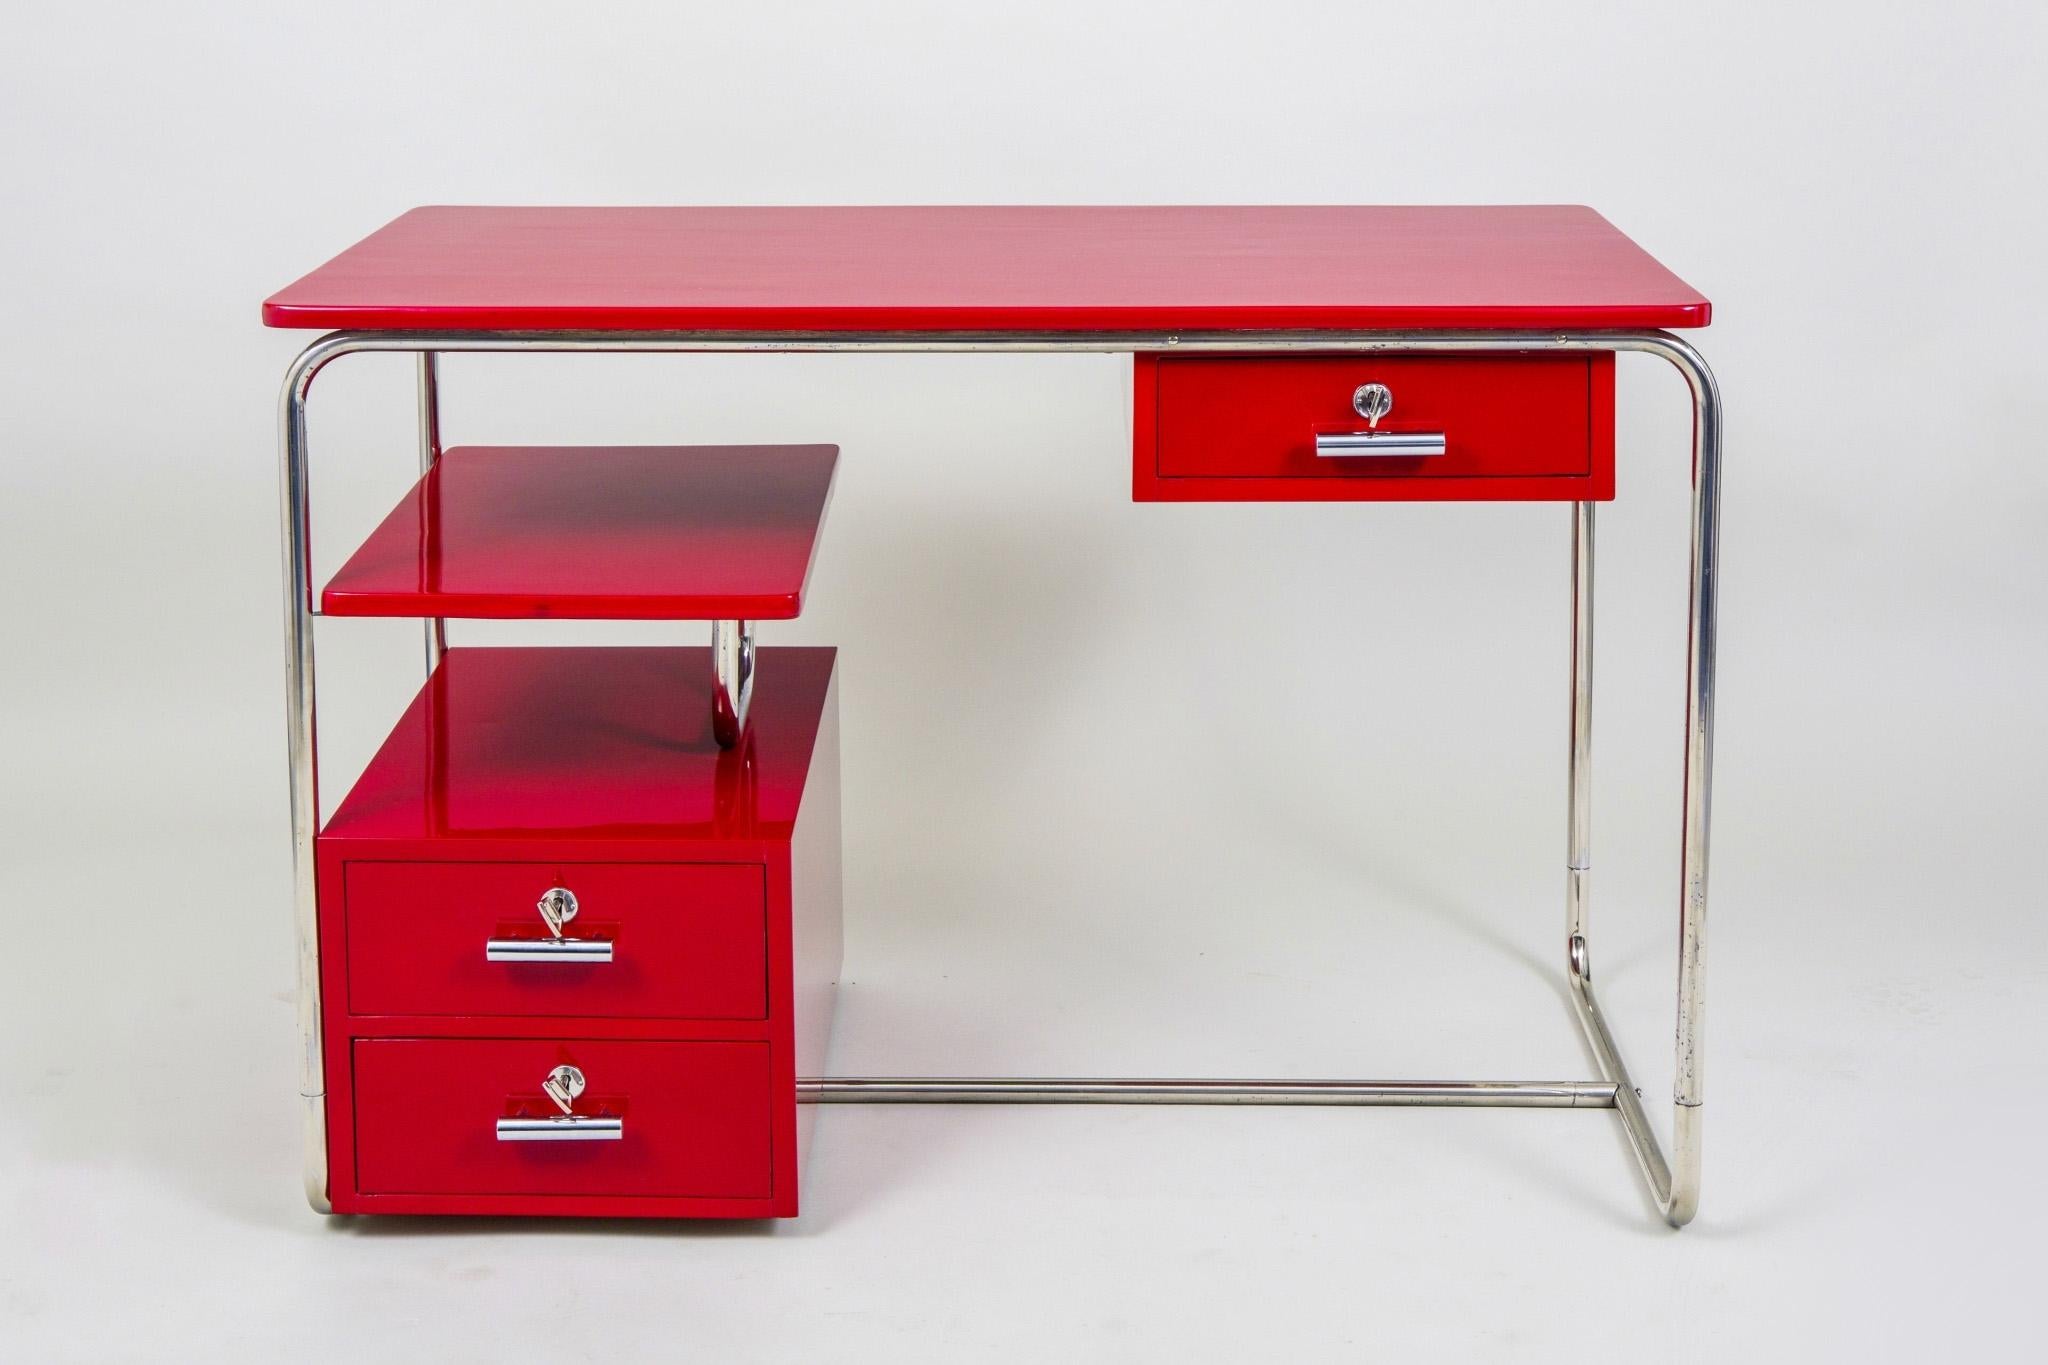 Mid-20th Century Chrome and Red Bauhaus Desk, Made in 1930s Germany, Fully Restored For Sale